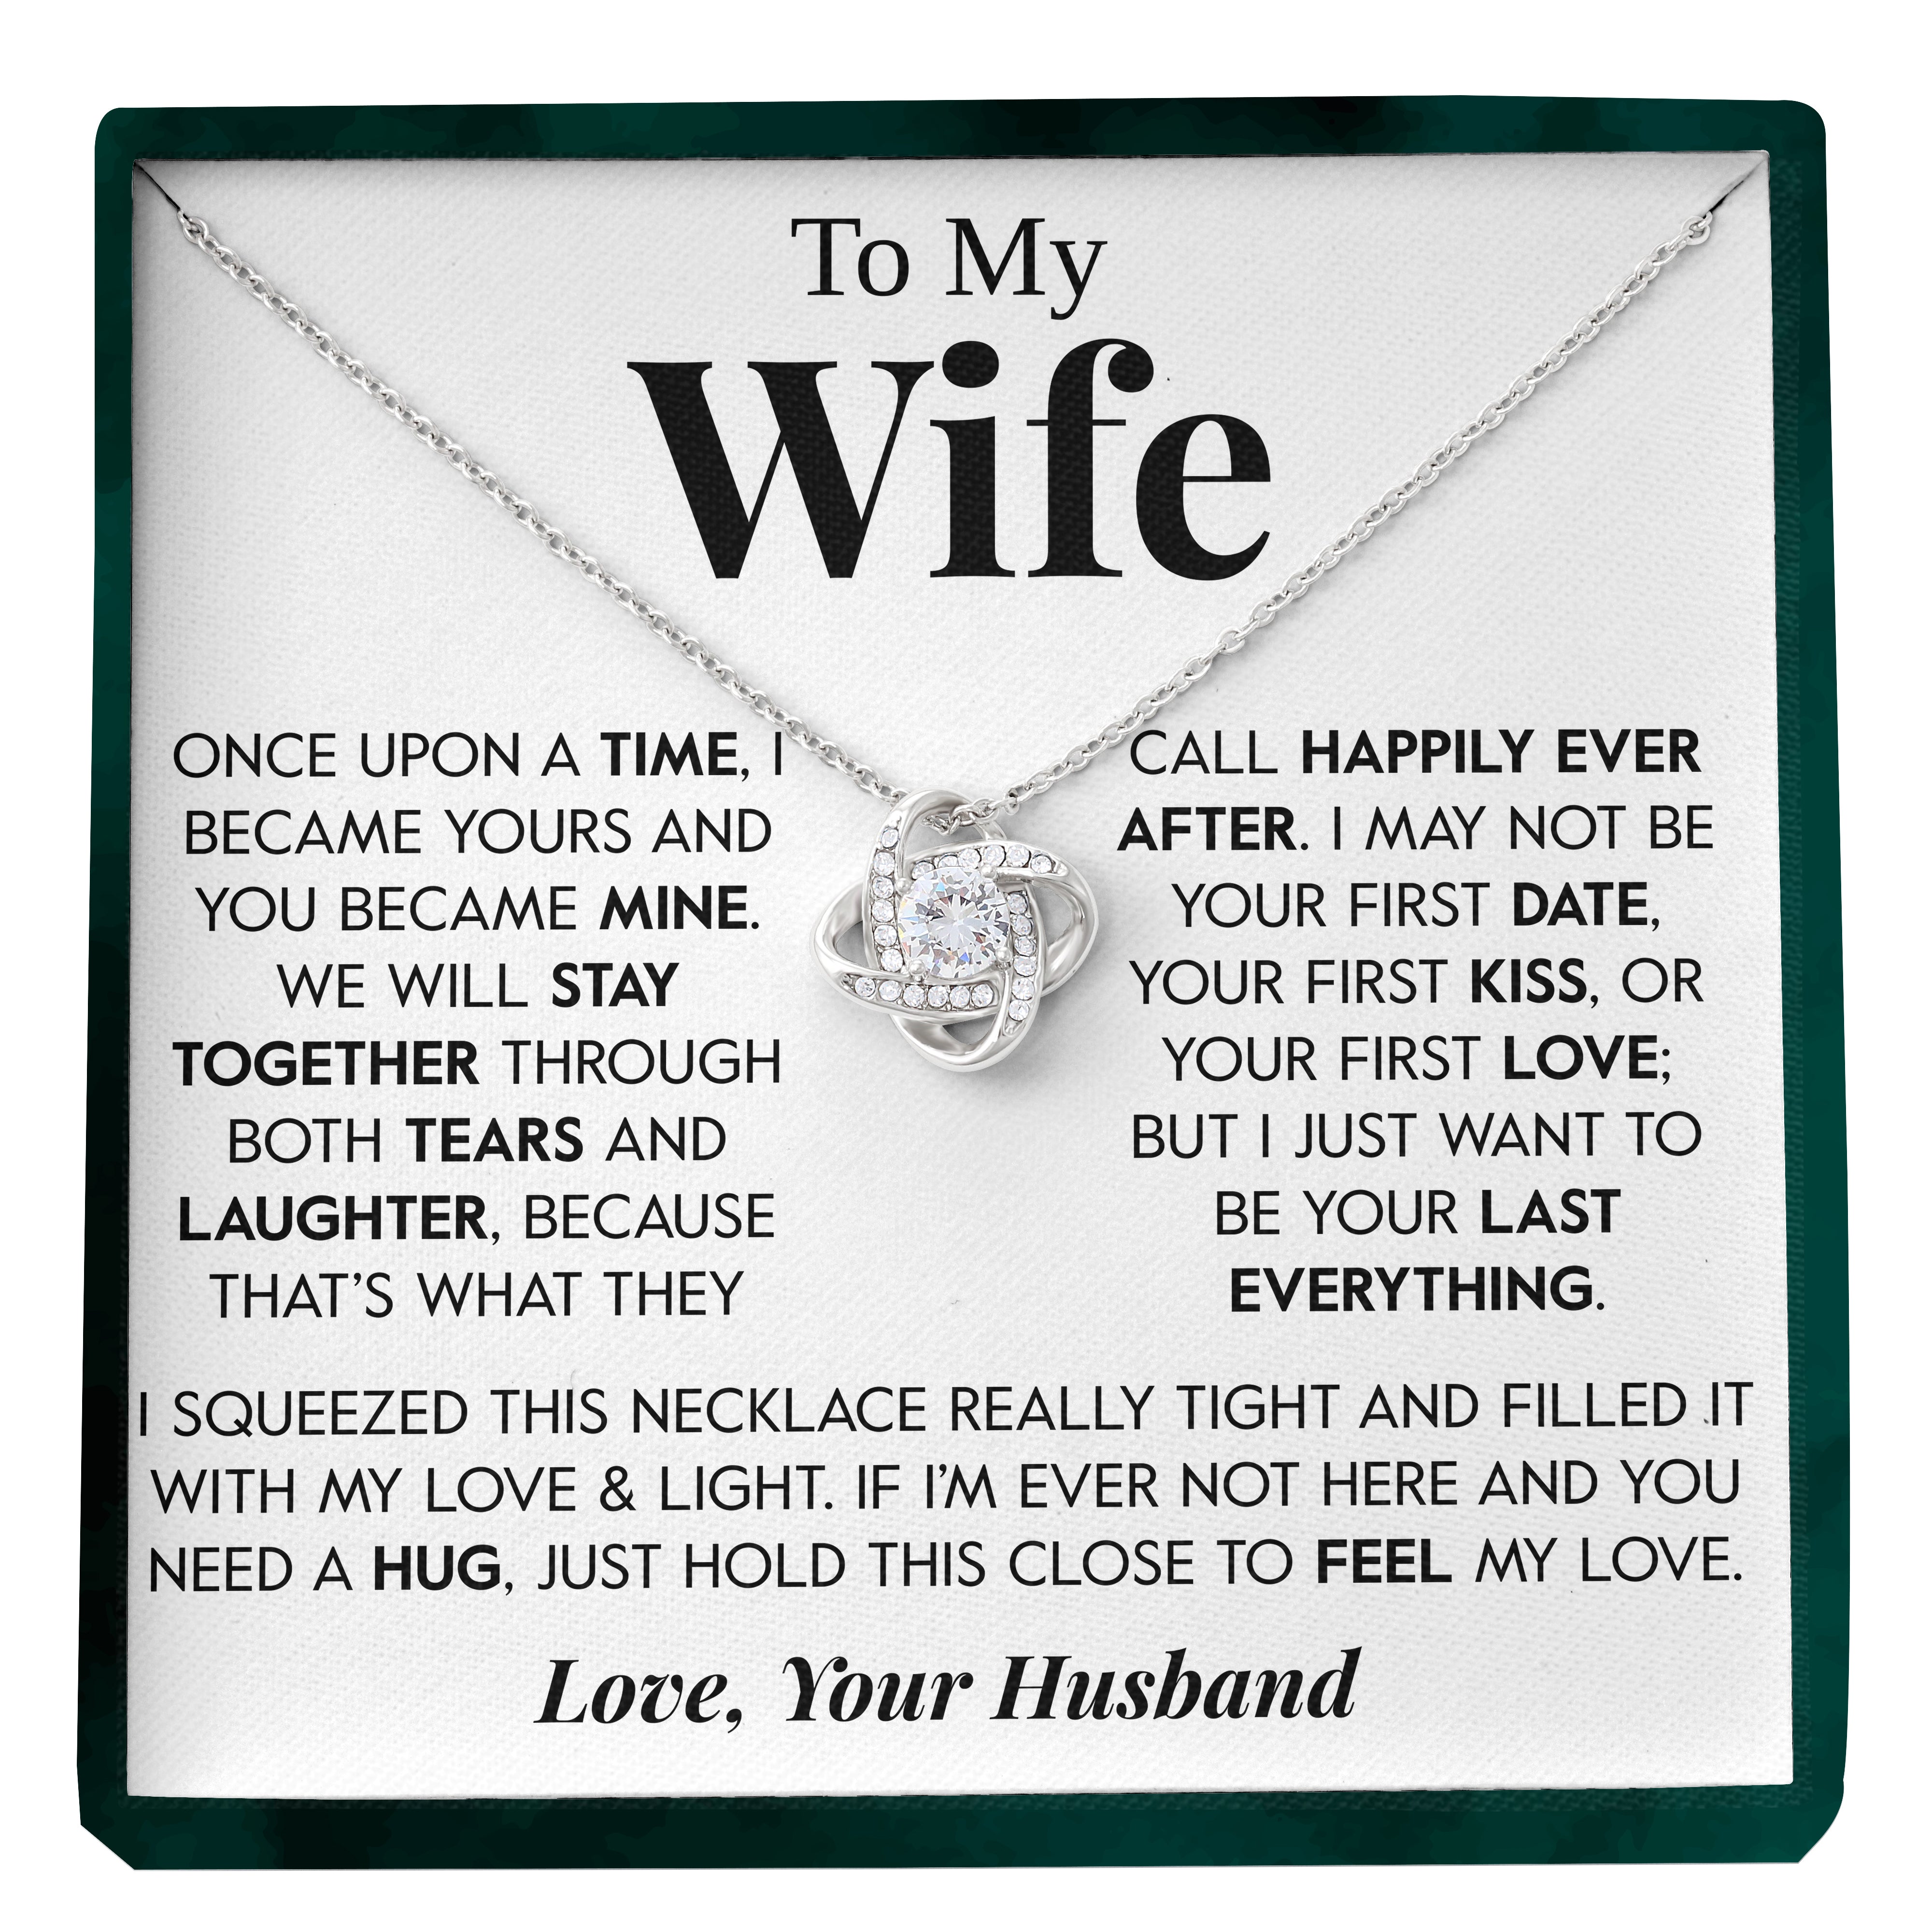 To My Wife | "Happily Ever After" | Love Knot Necklace